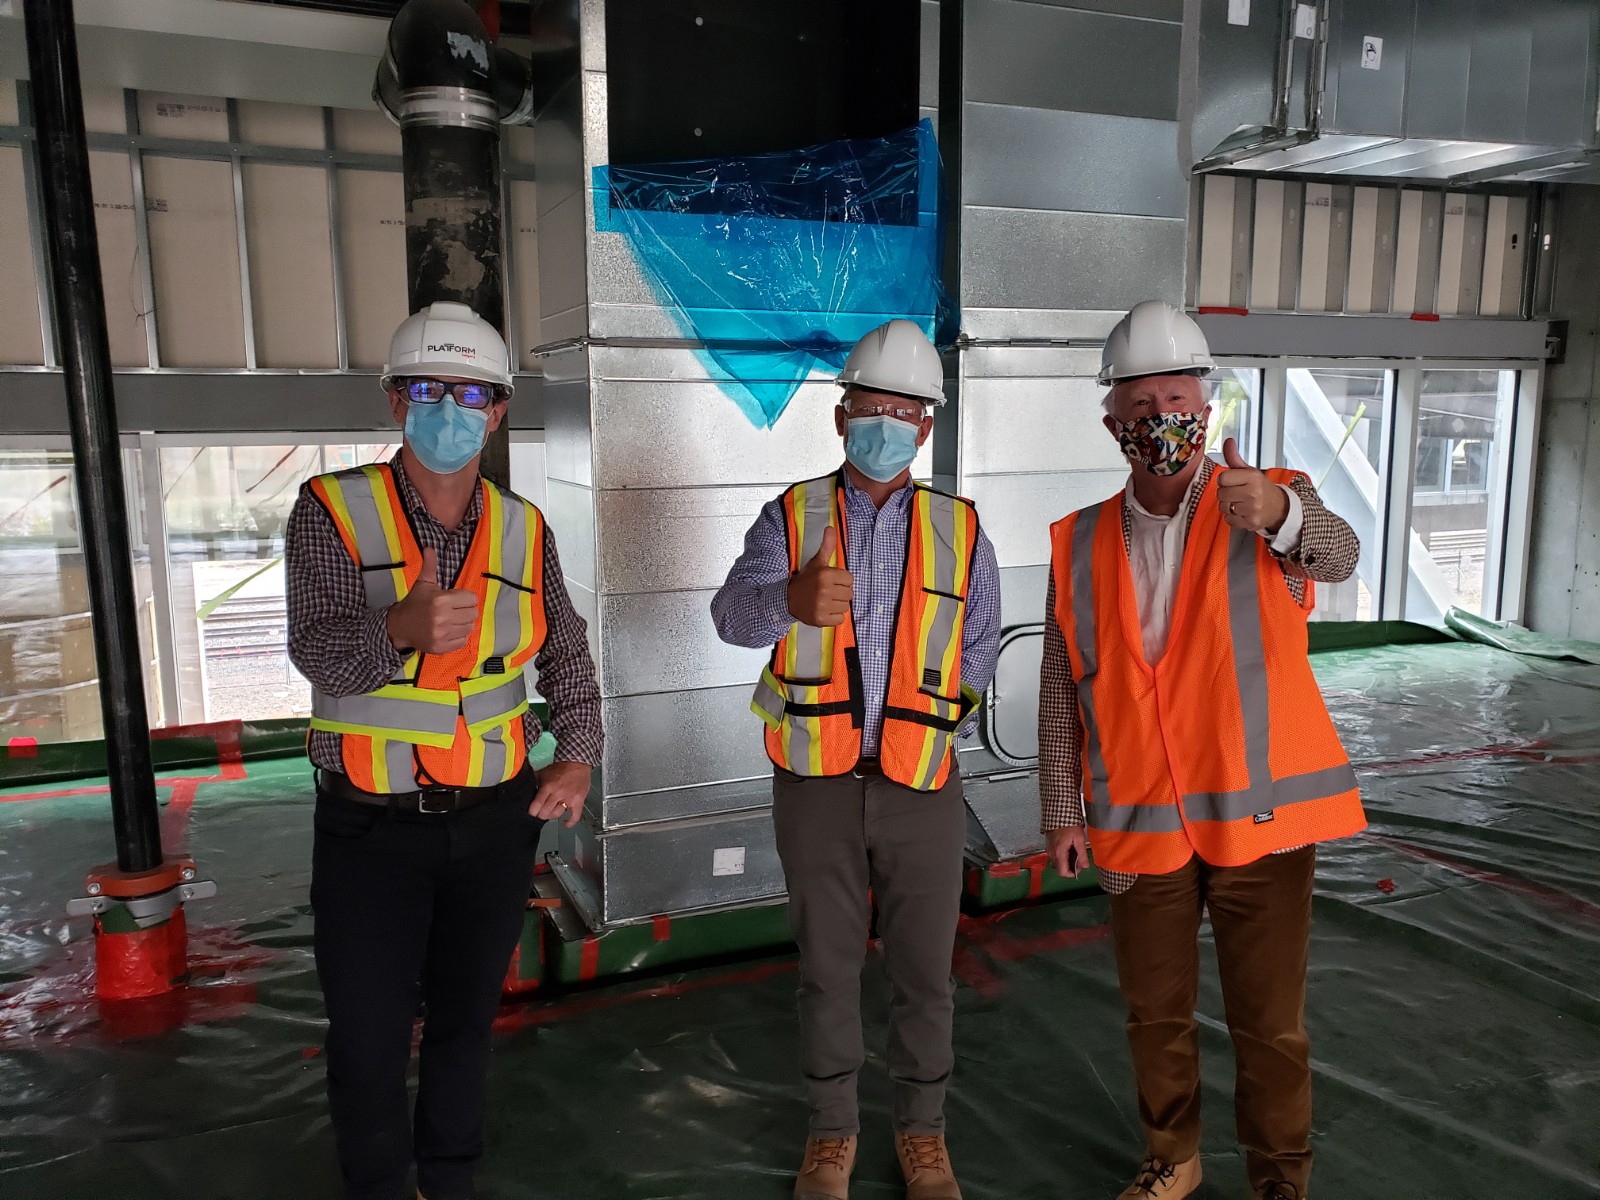 Friday, September 18, 2020 — Senator Doug Black (right) participates in a site visit of the Platform Calgary Innovation Centre, which will serve as a tech hub upon opening in 2021.